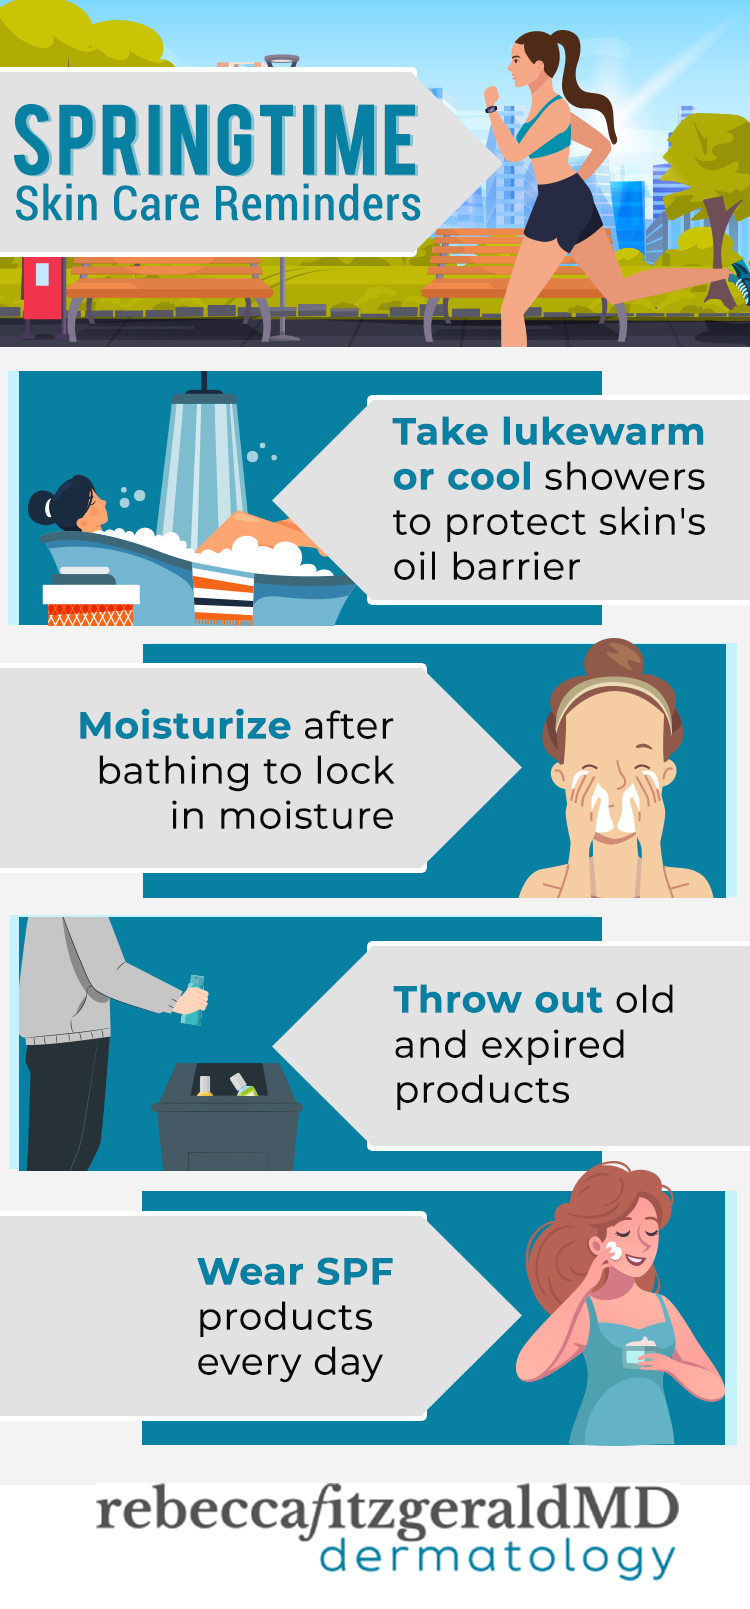 An infographic showing how you can protect your skin in the spring season